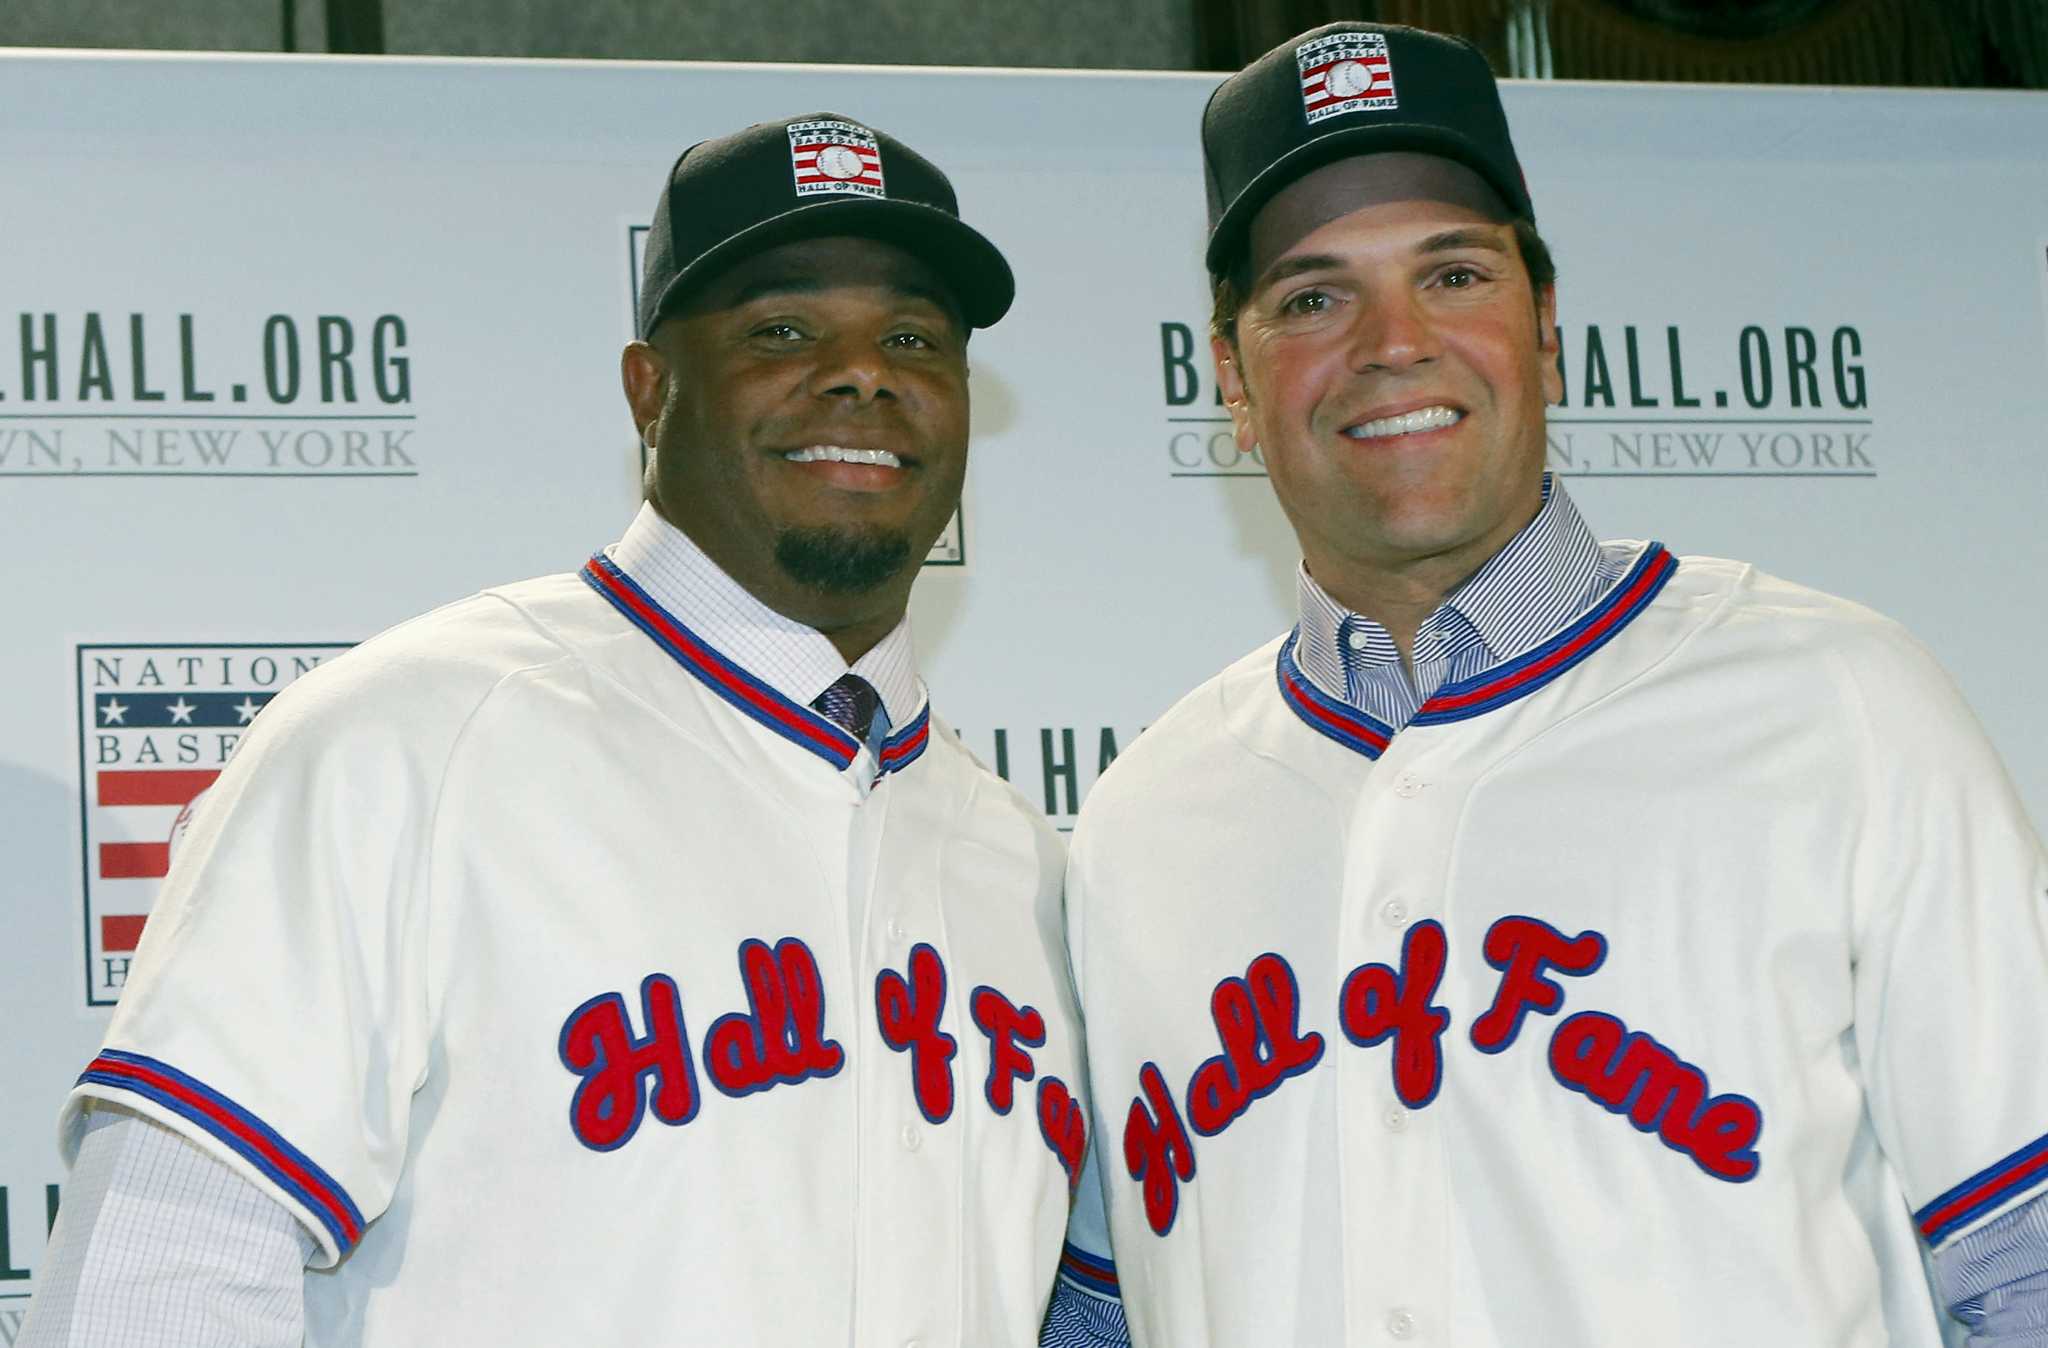 Mike Piazza will enter Hall of Fame with Mets' cap